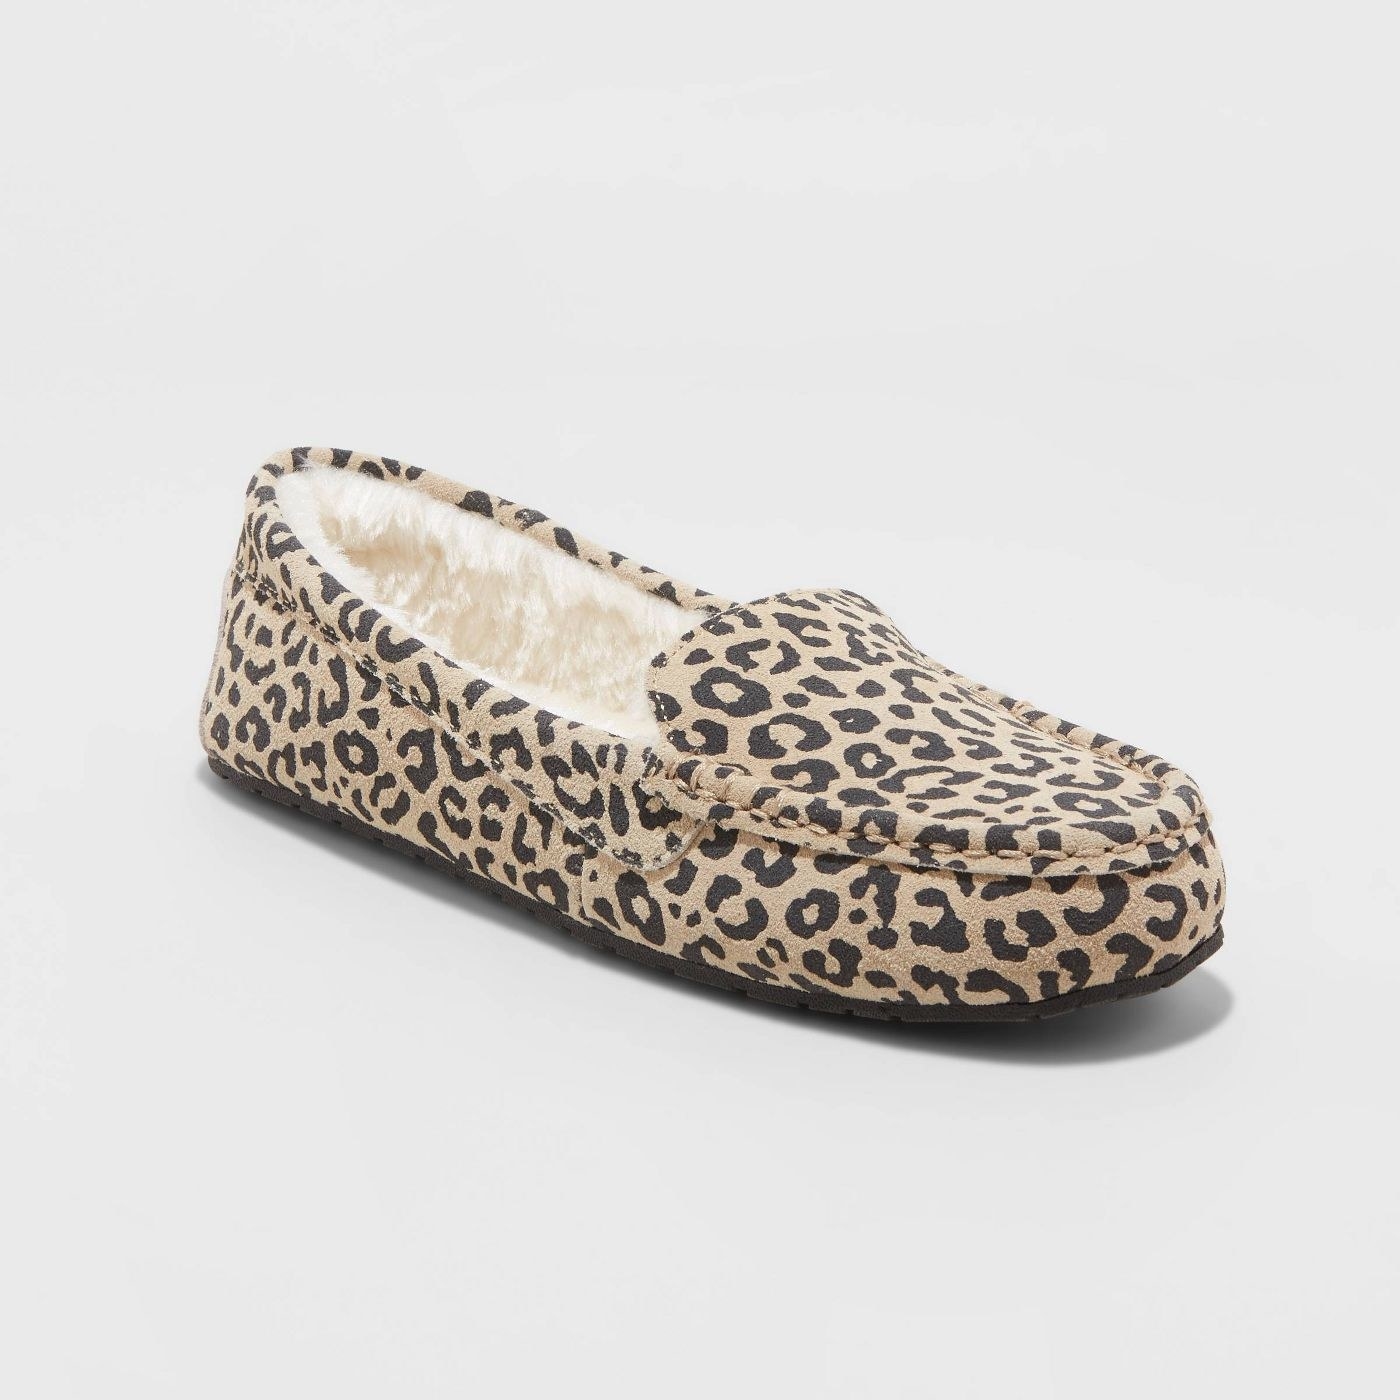 Brown moccasins with black leopard spots and cream-colored lining inside